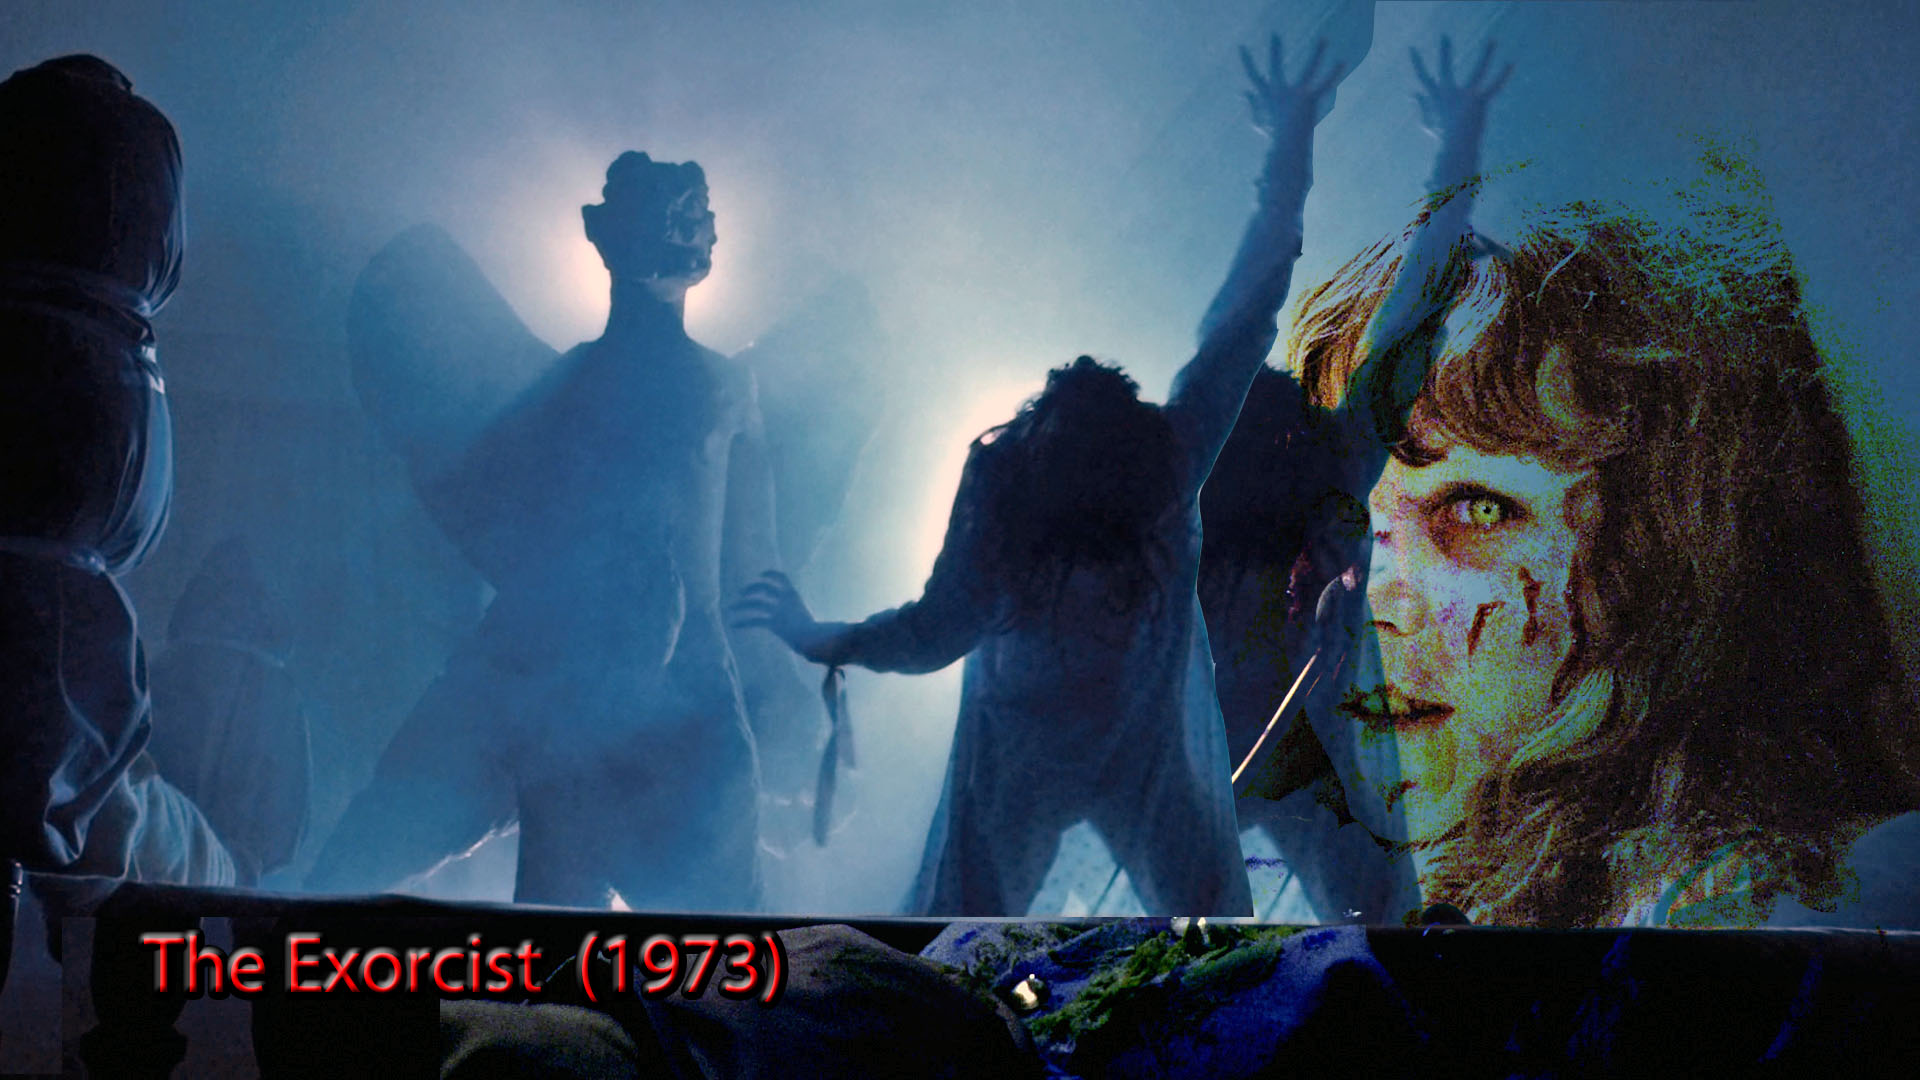 The Exorcist 1973 - Horror Movies Wallpaper 36672132 - Fanpop